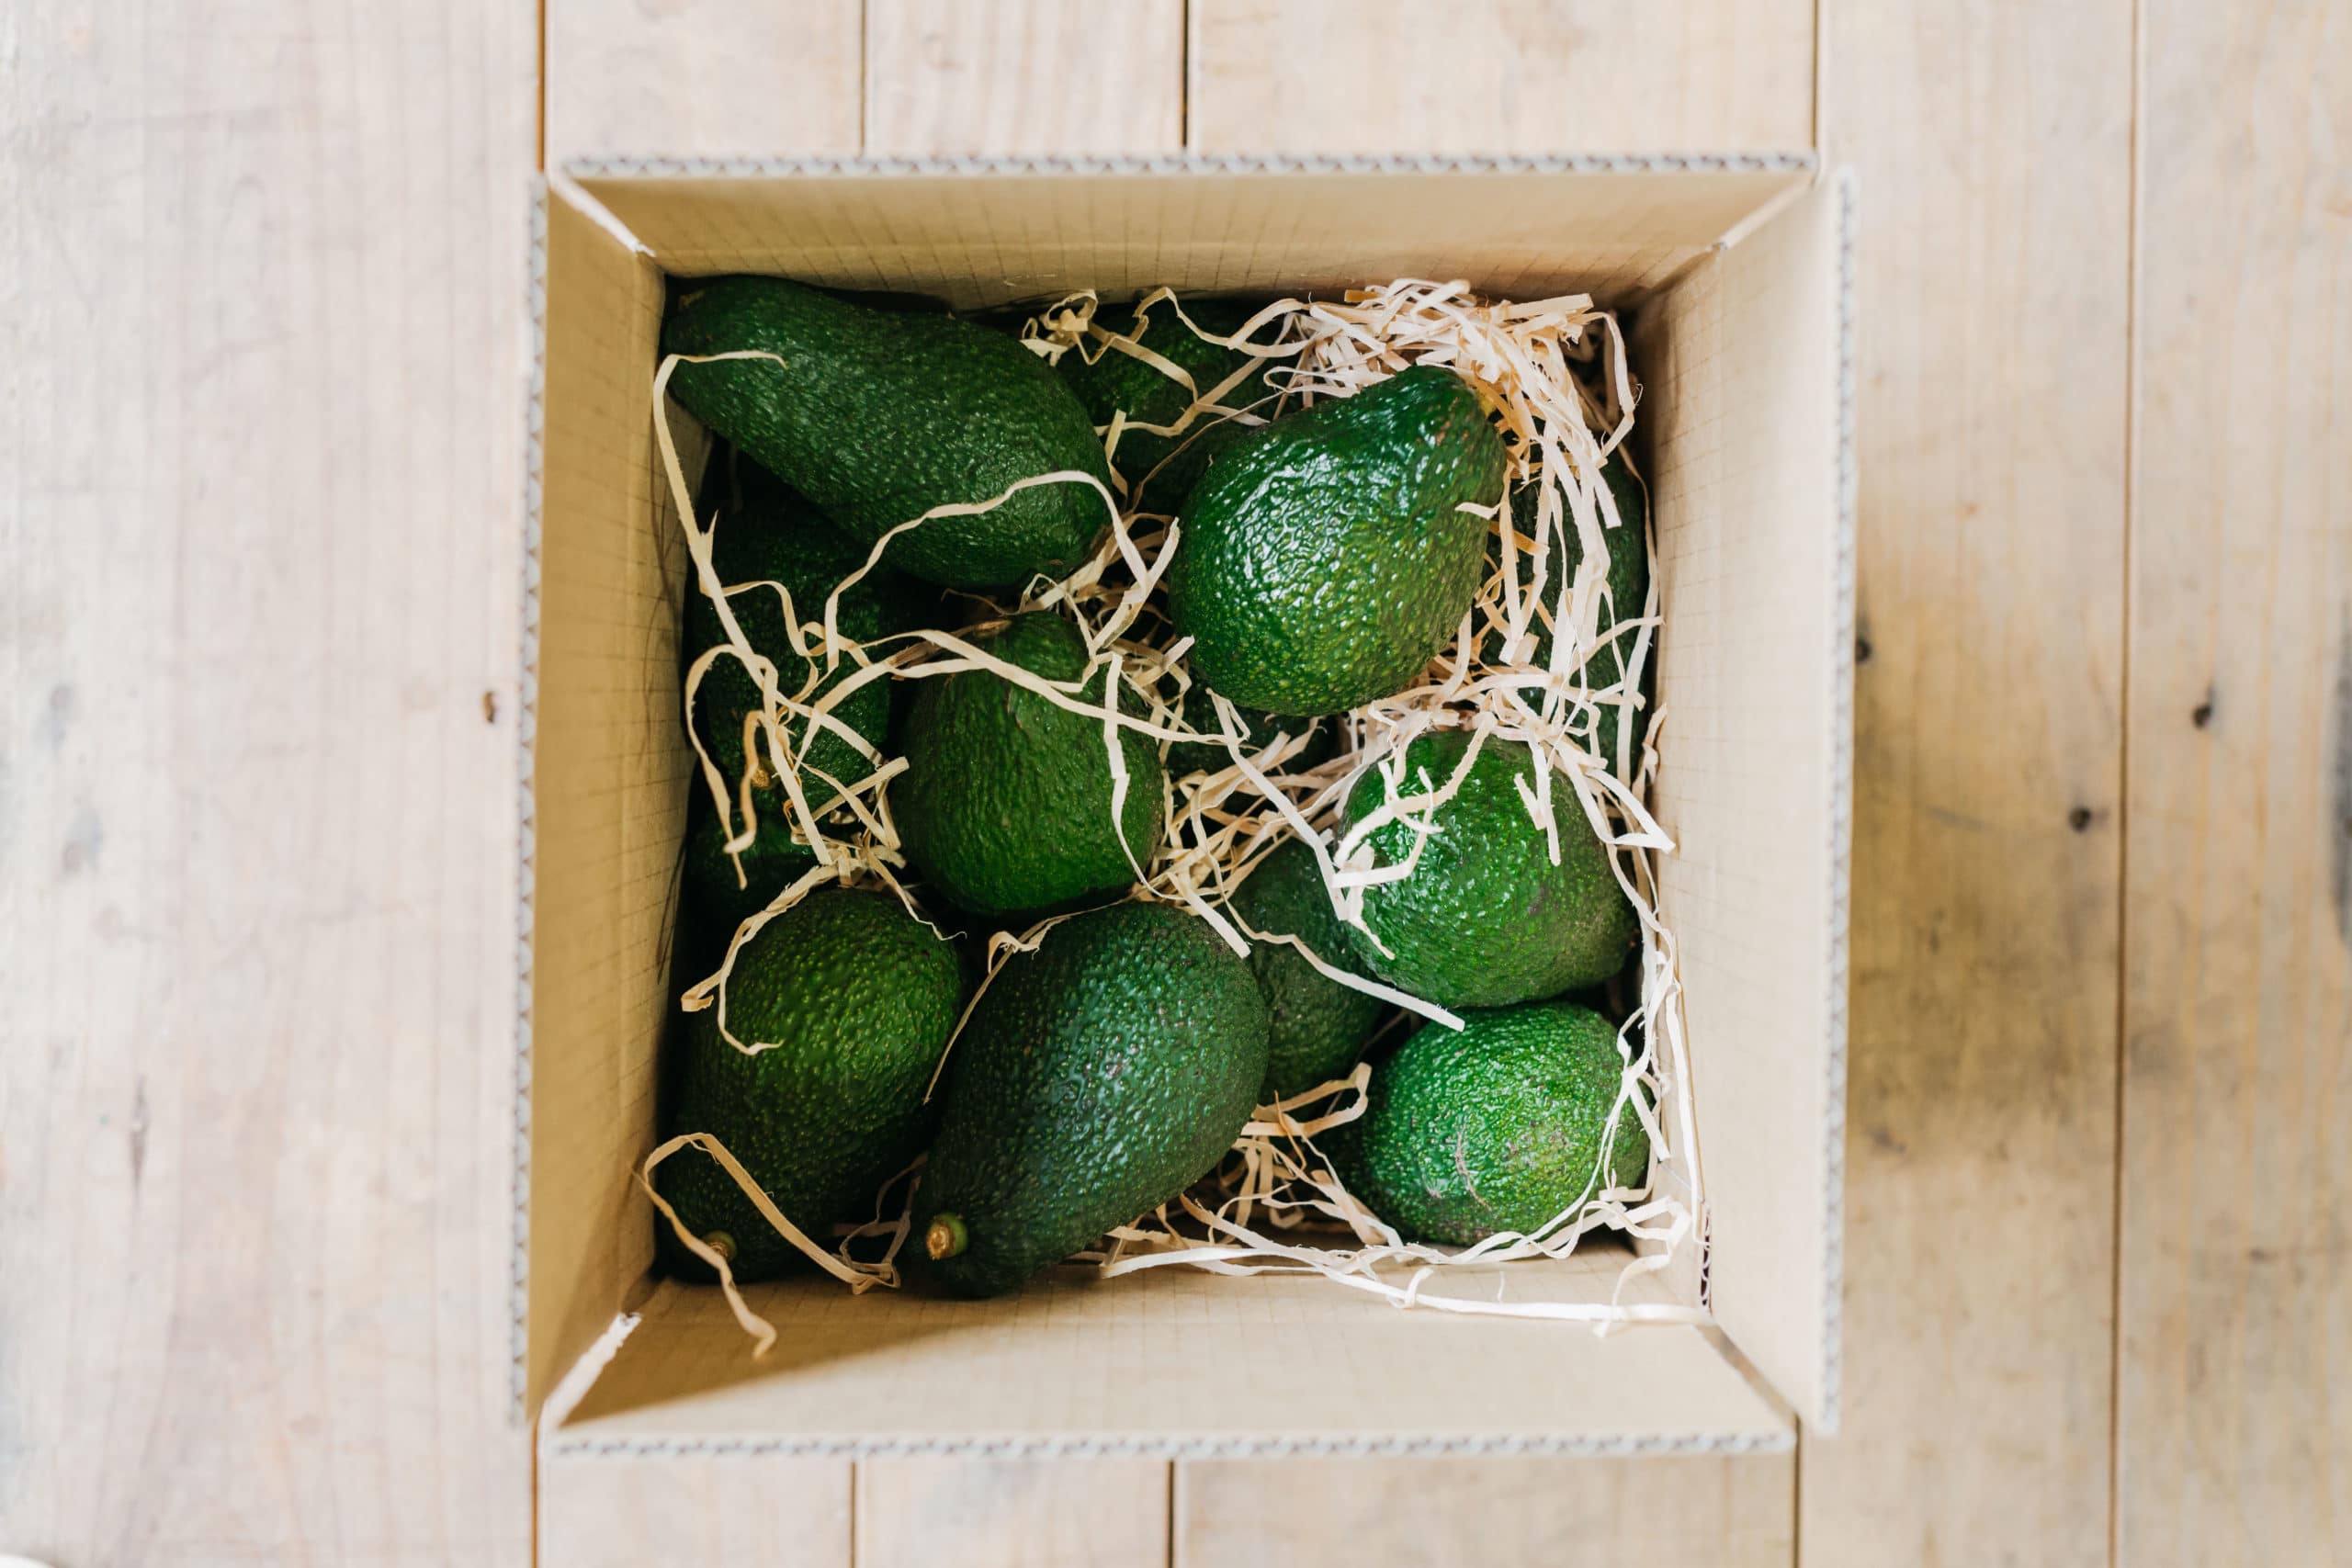 How to Store Avocados the Right Way